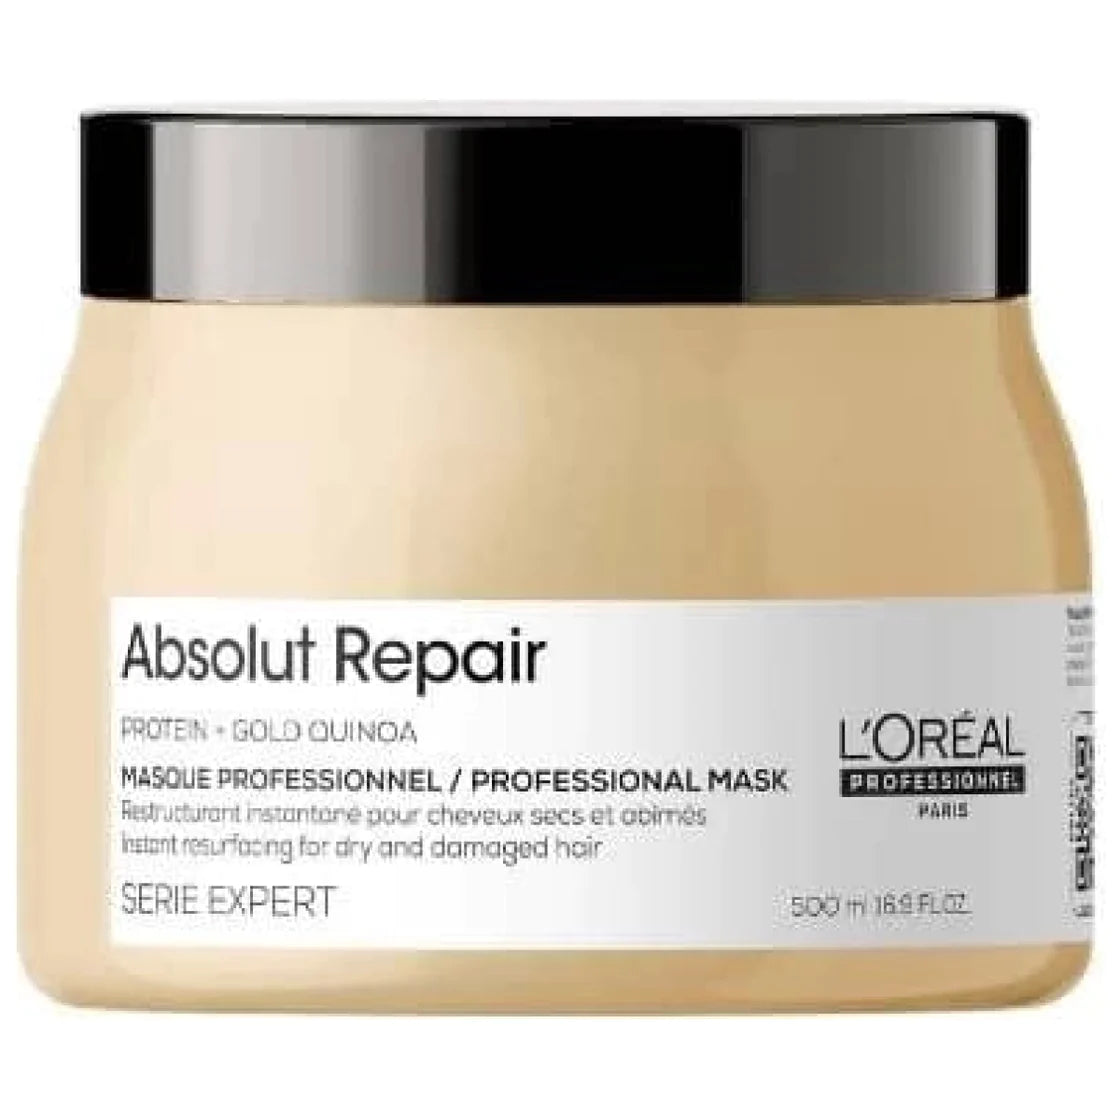 Loreal Kolkata Calcutta  All You Need to Know BEFORE You Go